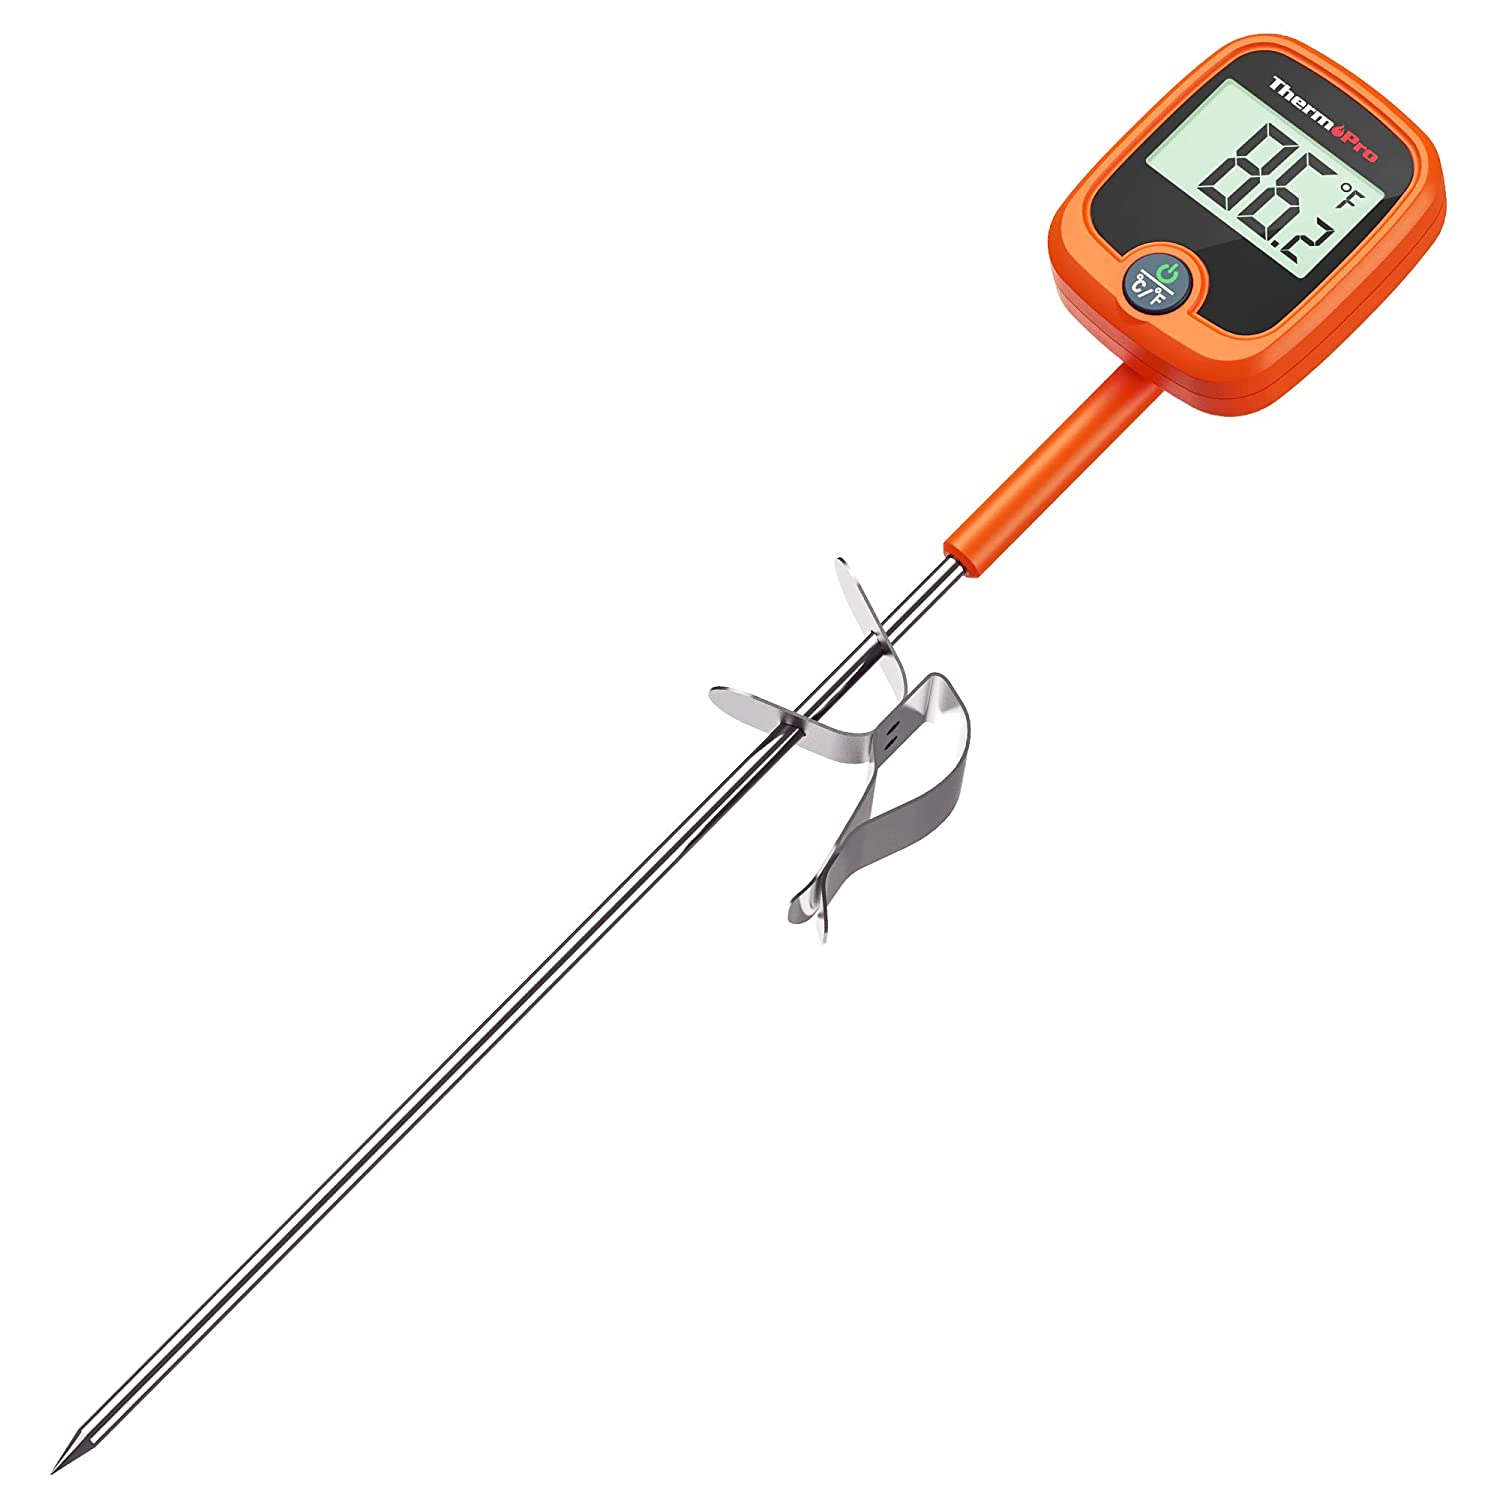 ThermoPro TP930 Bluetooth Kachen Thermometer User Manual